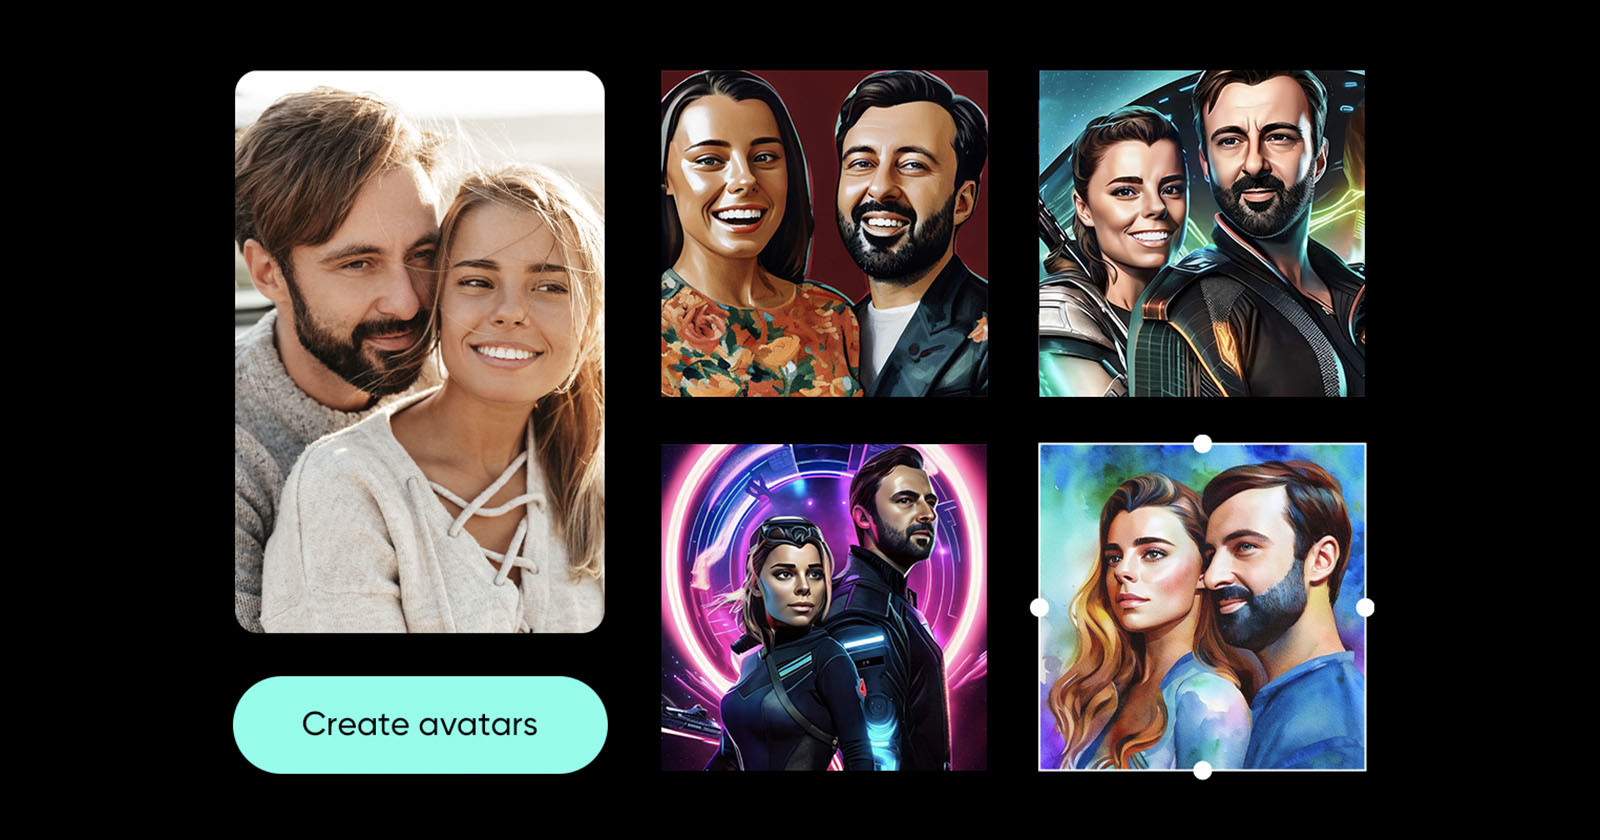 Picsart is the First Major Editor Able to Generate Two AI Avatars in One Image